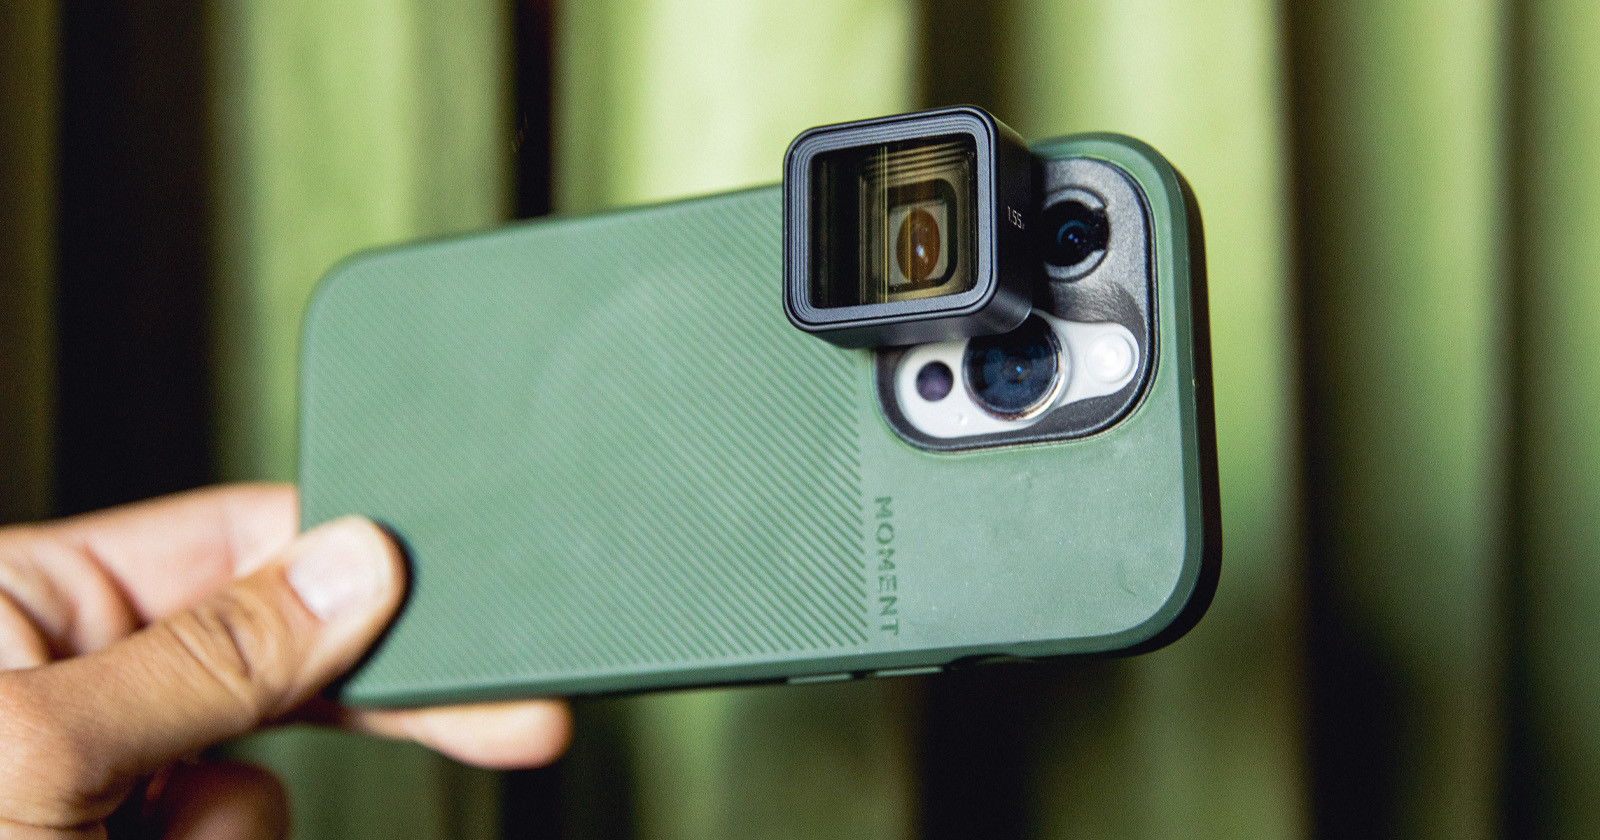 Moments New 1.55x Anamorphic Lens Adds a Hollywood Look to iPhone Vids